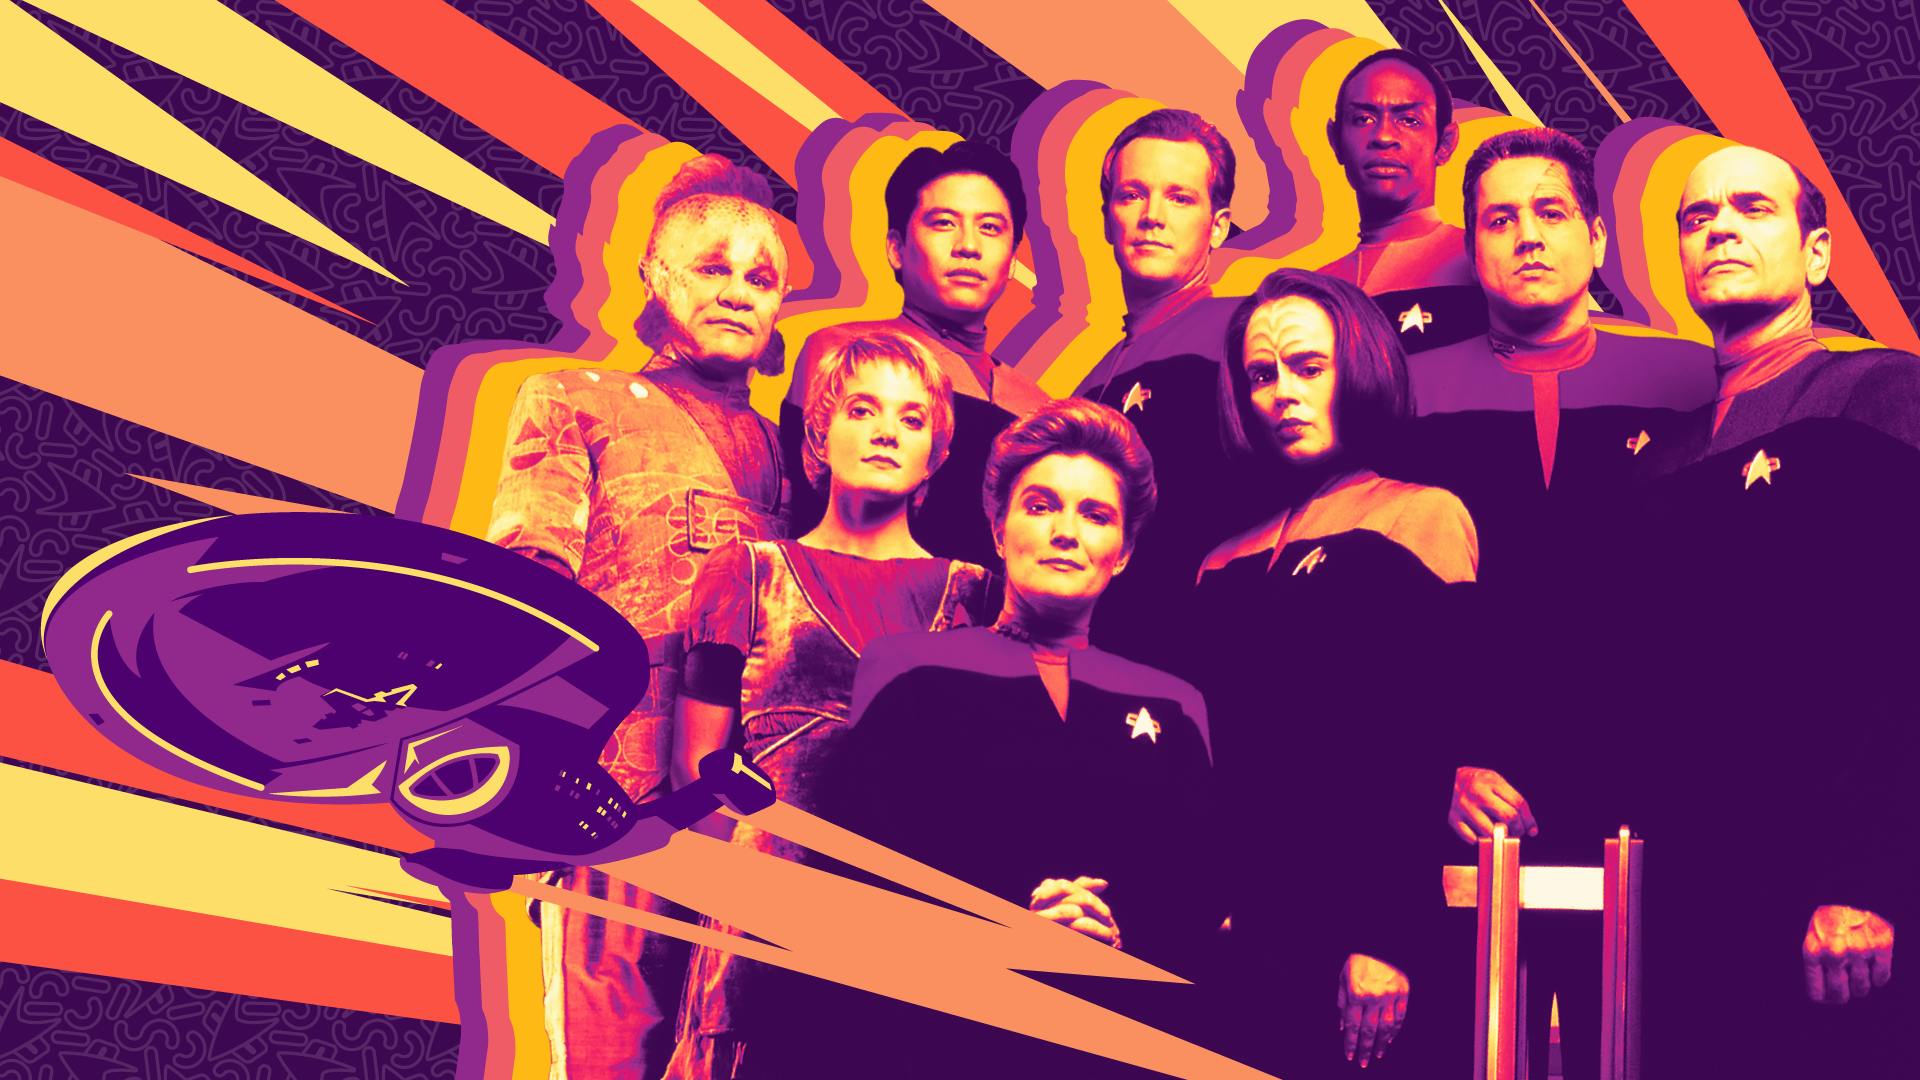 Stylized and filtered variant of the Star Trek: Voyager cast